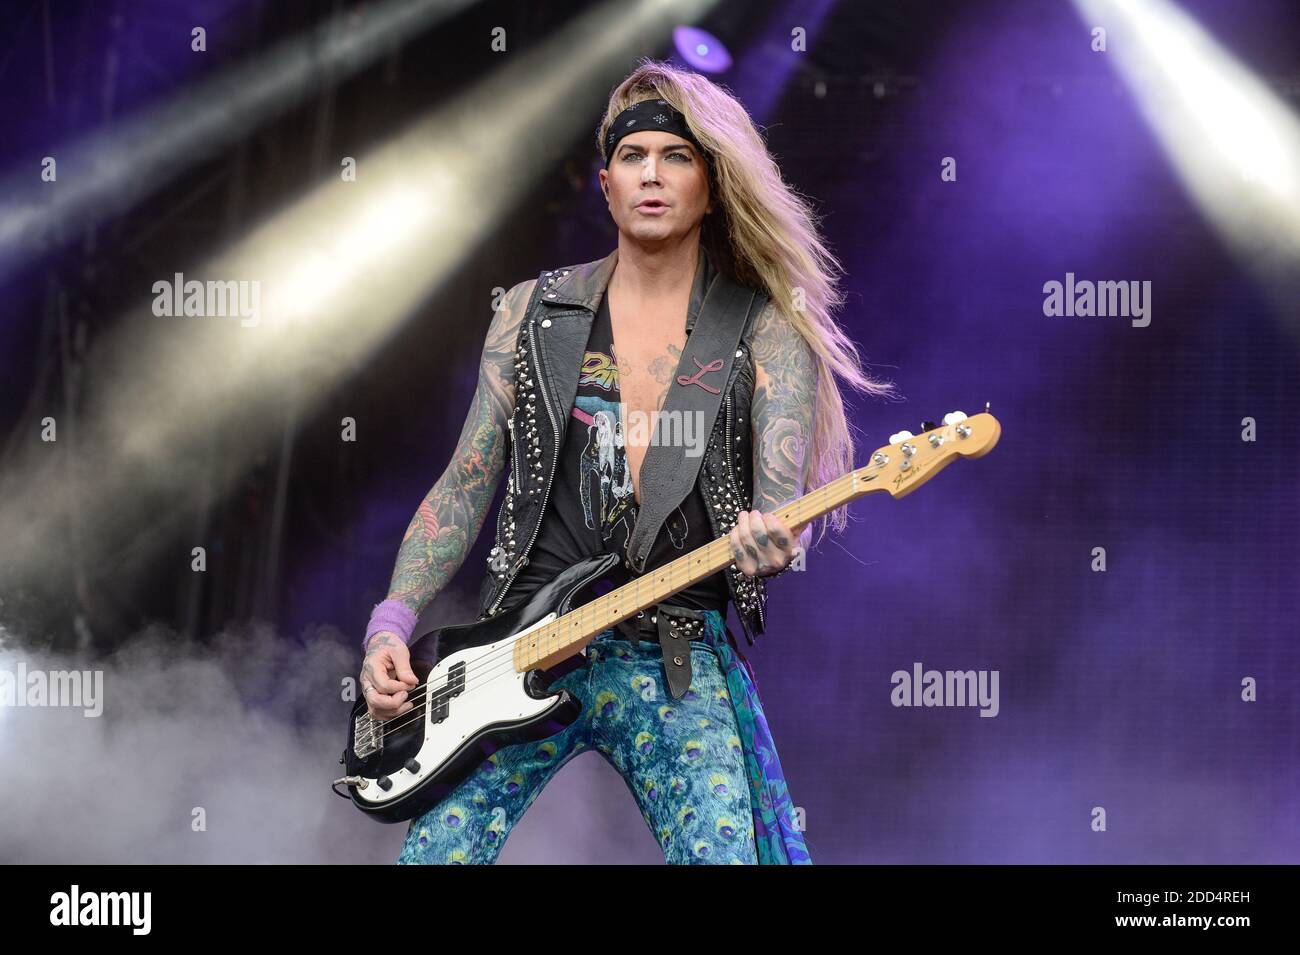 Steel Panther performing live on stage during Wacken Open Air Festival in Wacken, Germany on August 4, 2018. Photo by Julien Reynaud/APS-Medias/ABACAPRESS.COM Stock Photo